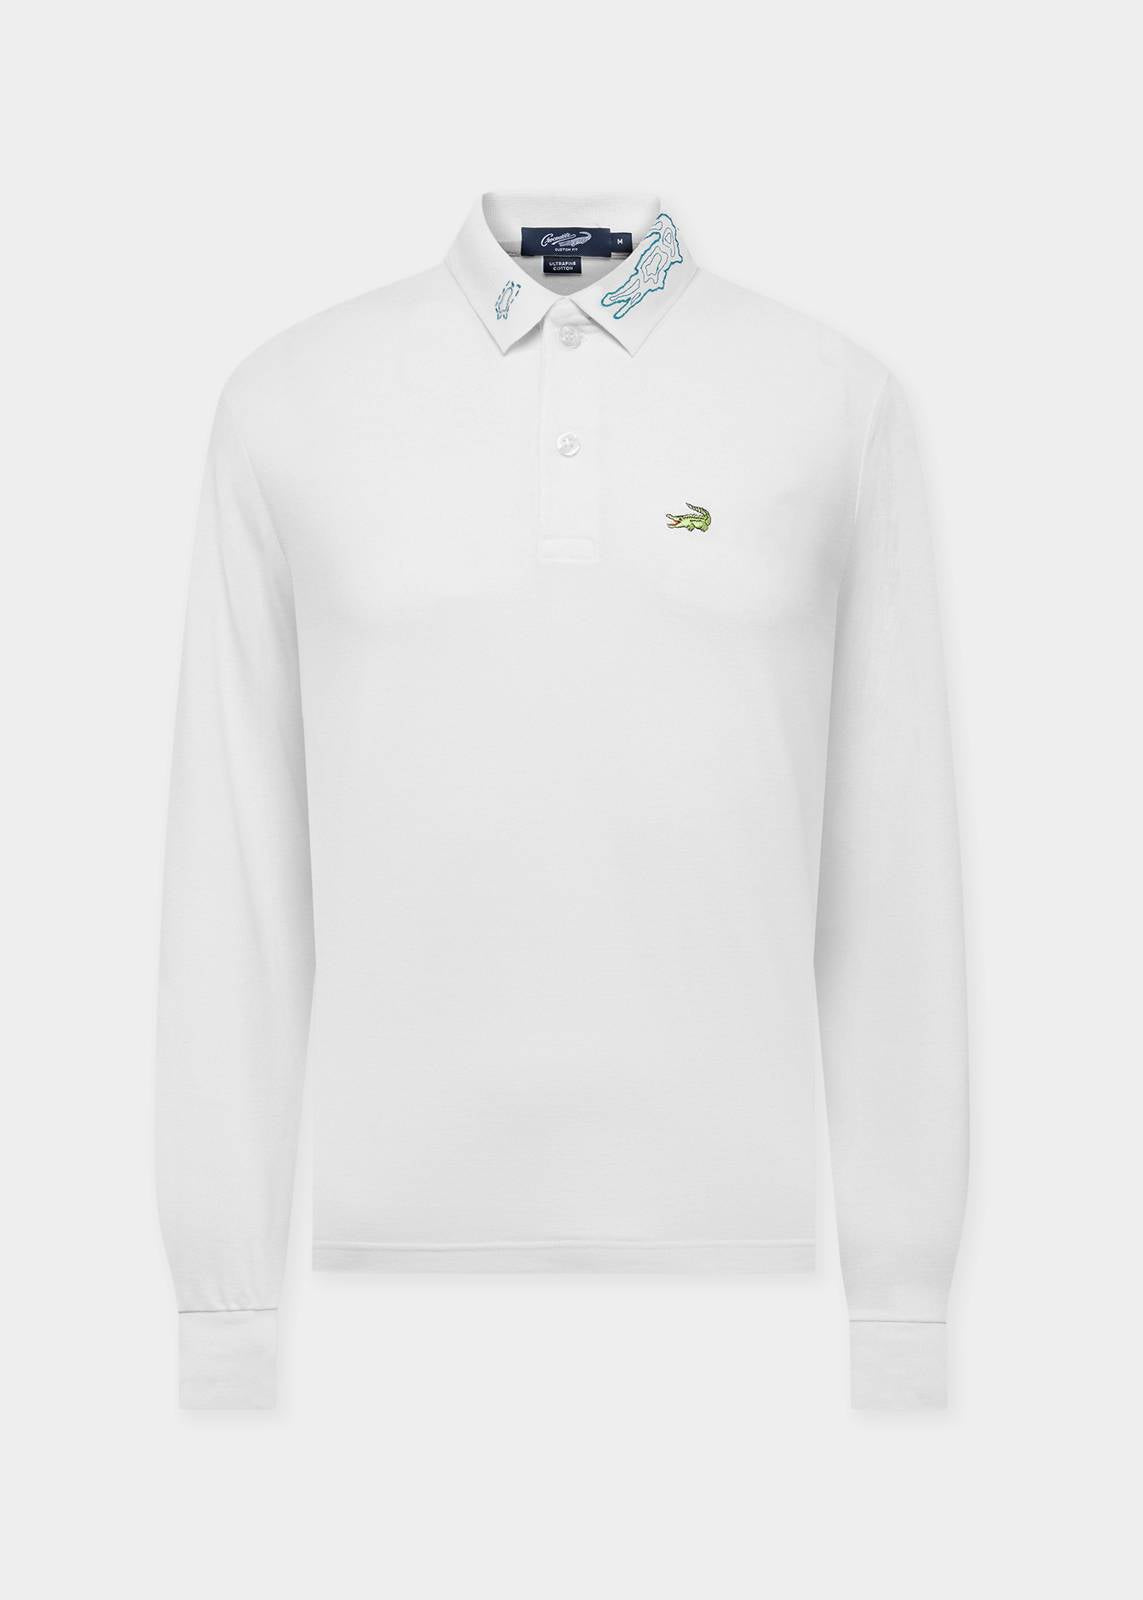 WHITE  CUSTOM FIT LONG SLEEVE POLO SHIRT WITH EMBROIDERED COLLAR